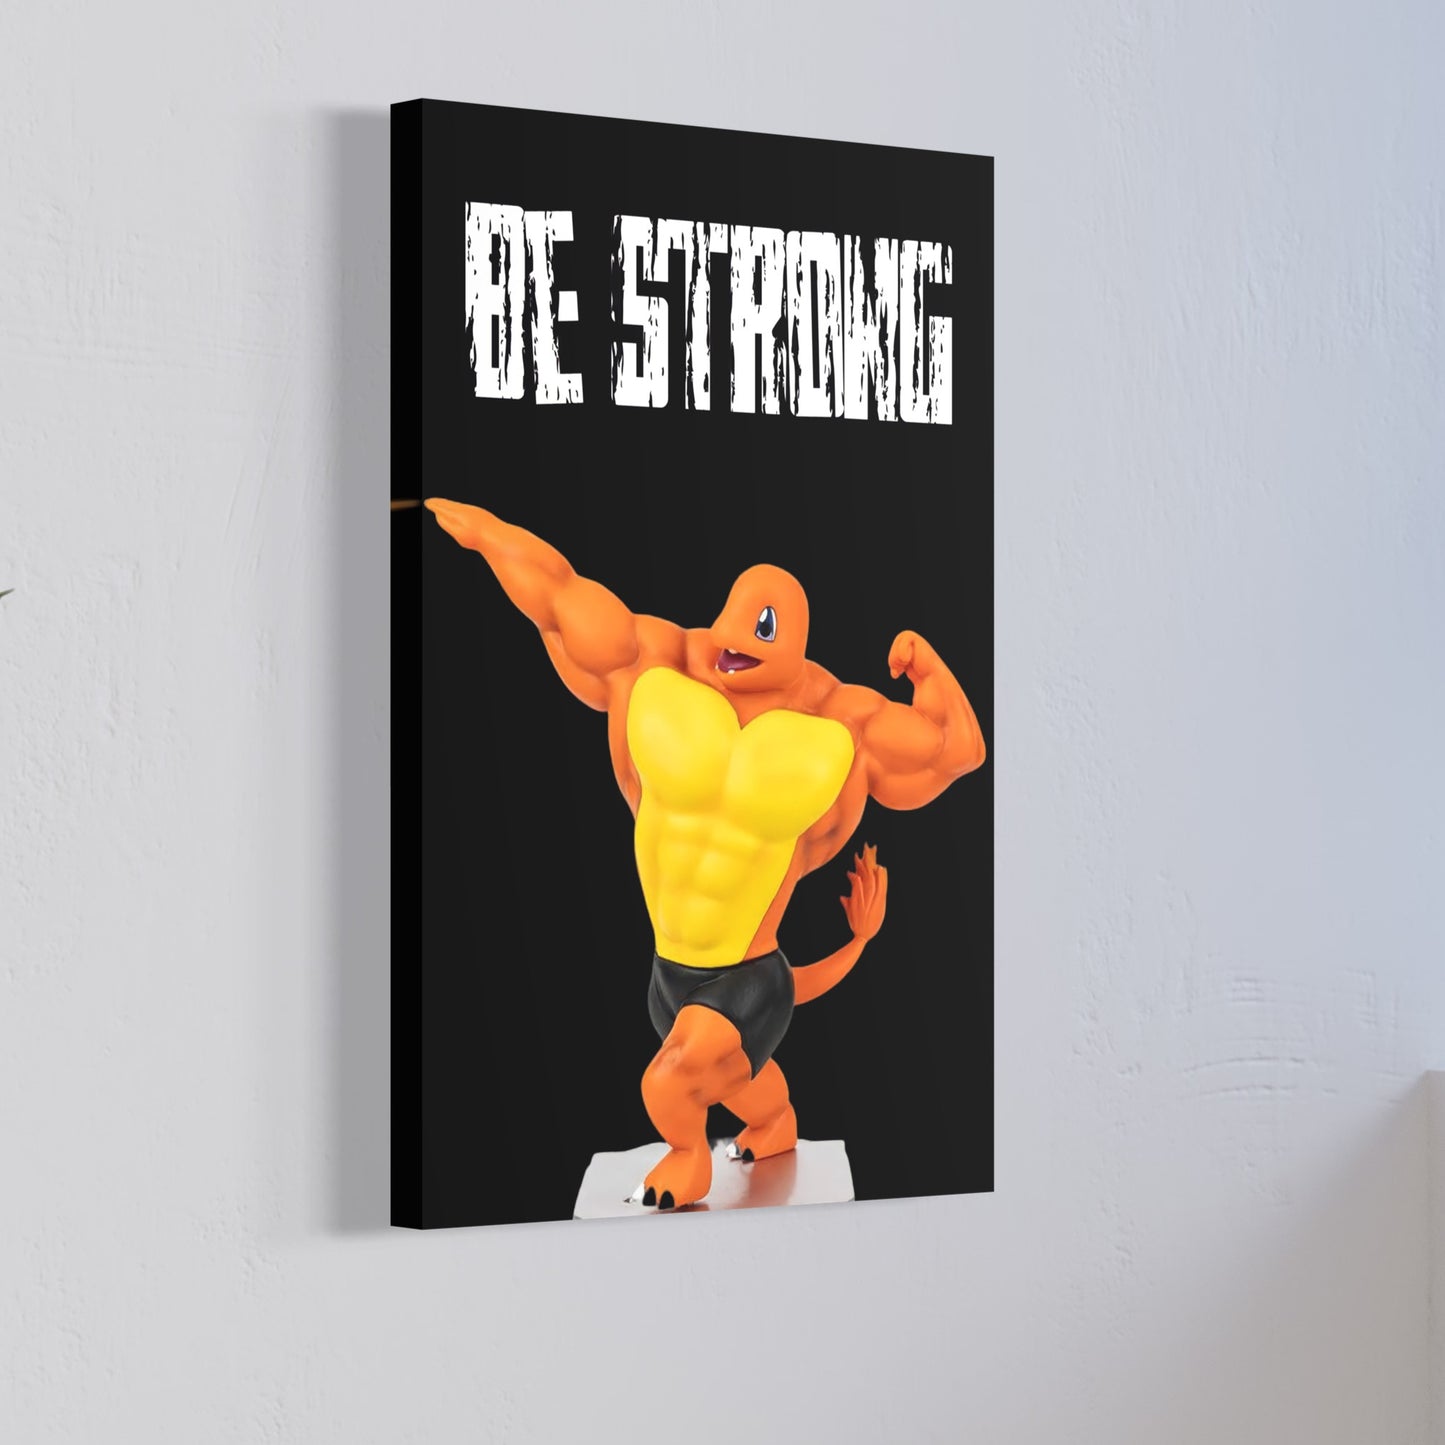 Be Strong. Be charmander.